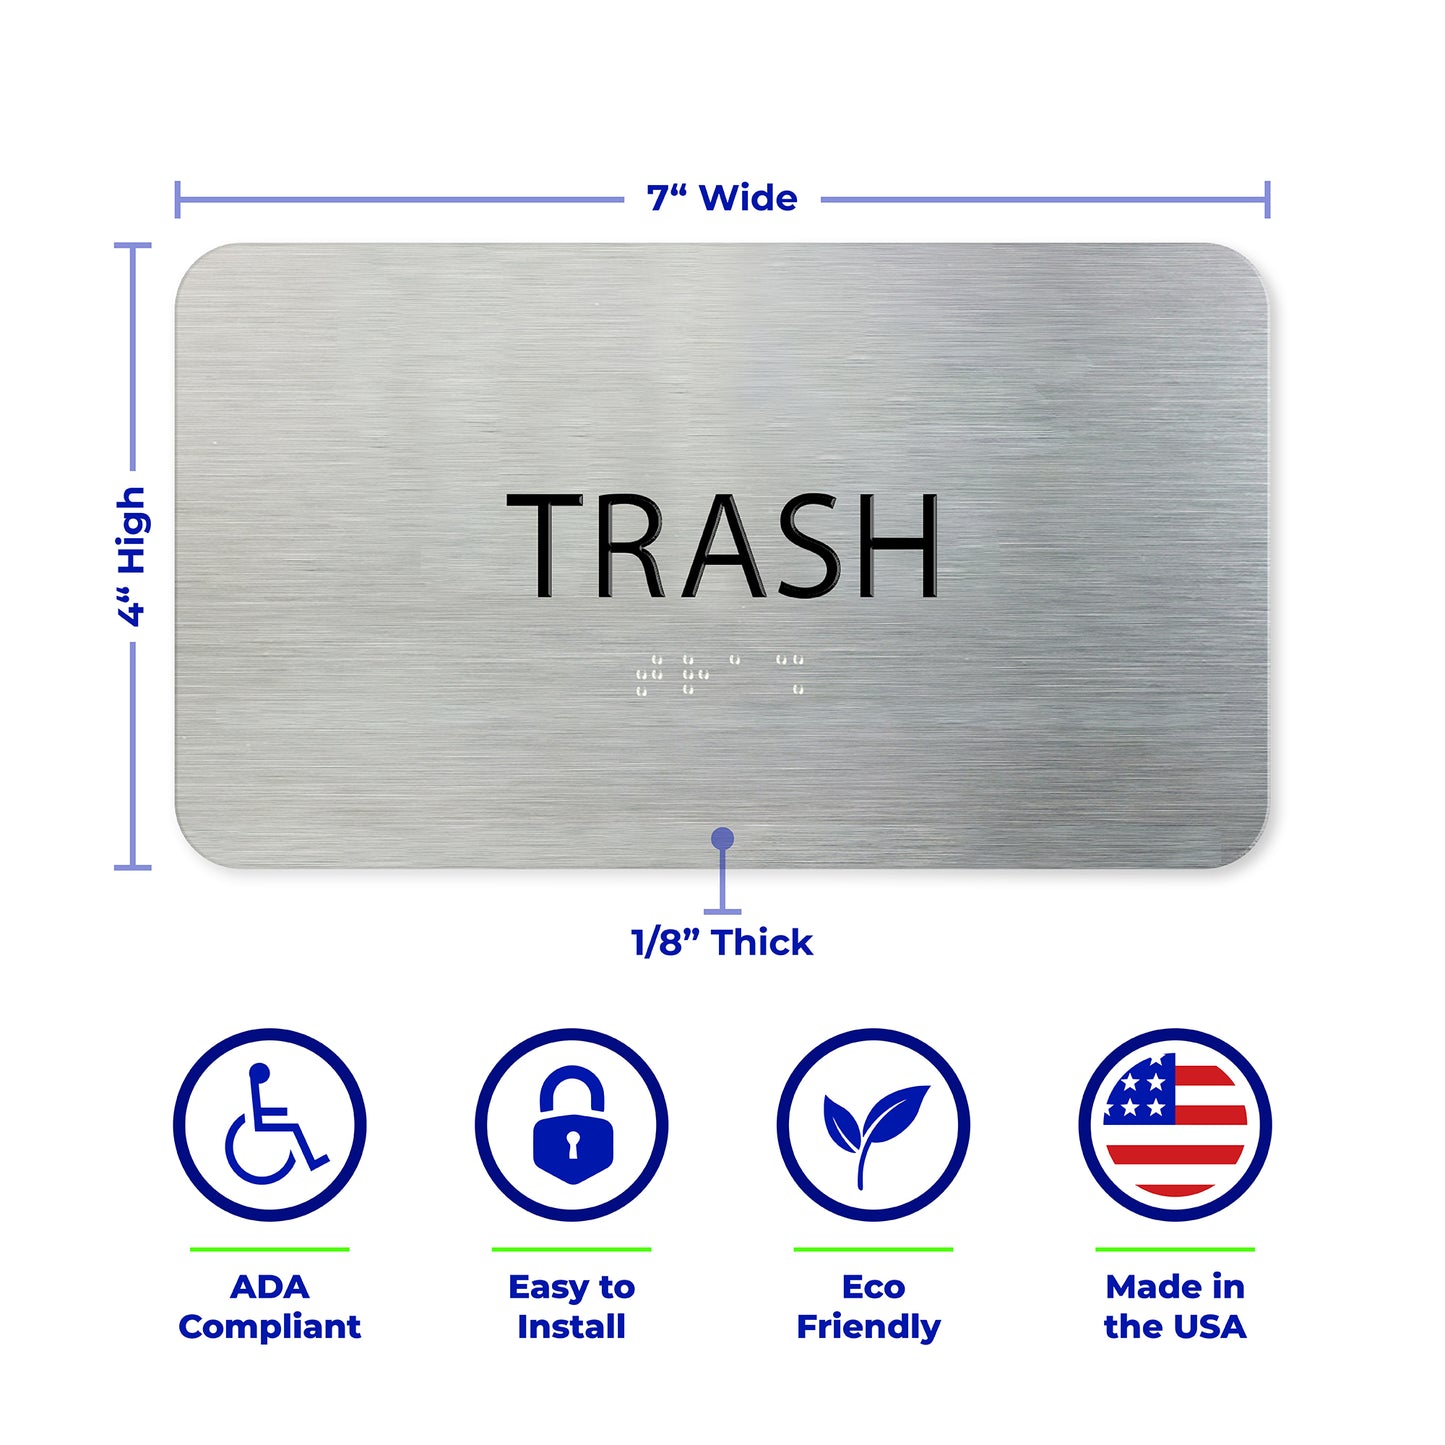 TRASH Sign, ADA Compliant, Signage for Commercial Building, Aluminum Brushed Silver, Black Raised Text, Grade 2 Braille, 7" x 4"